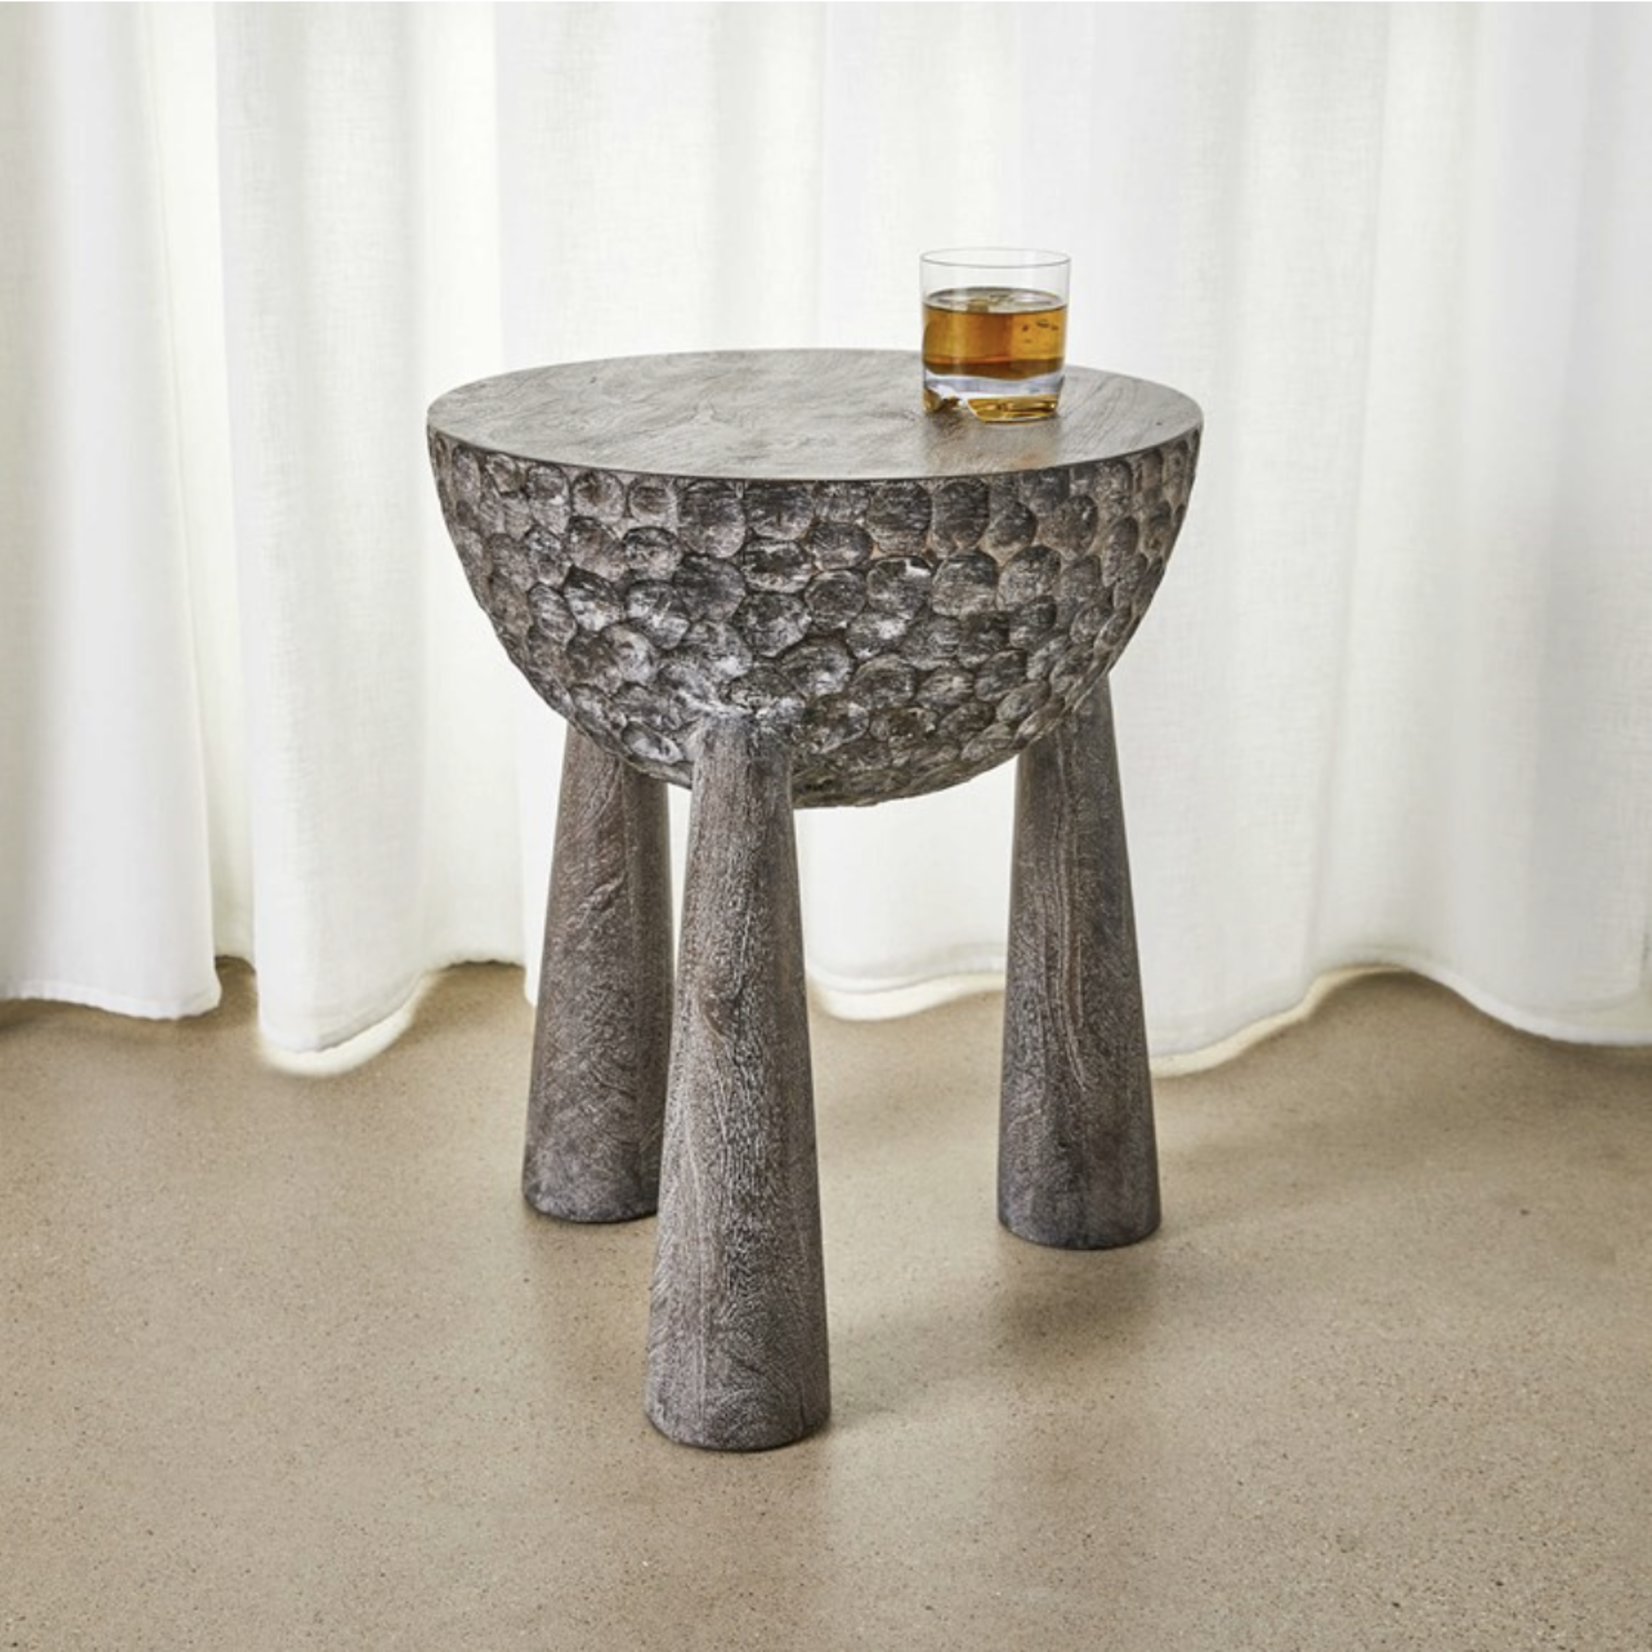 Outside The Box 22" Kettledrum Hand-chiseled Mango Wood Accent Table